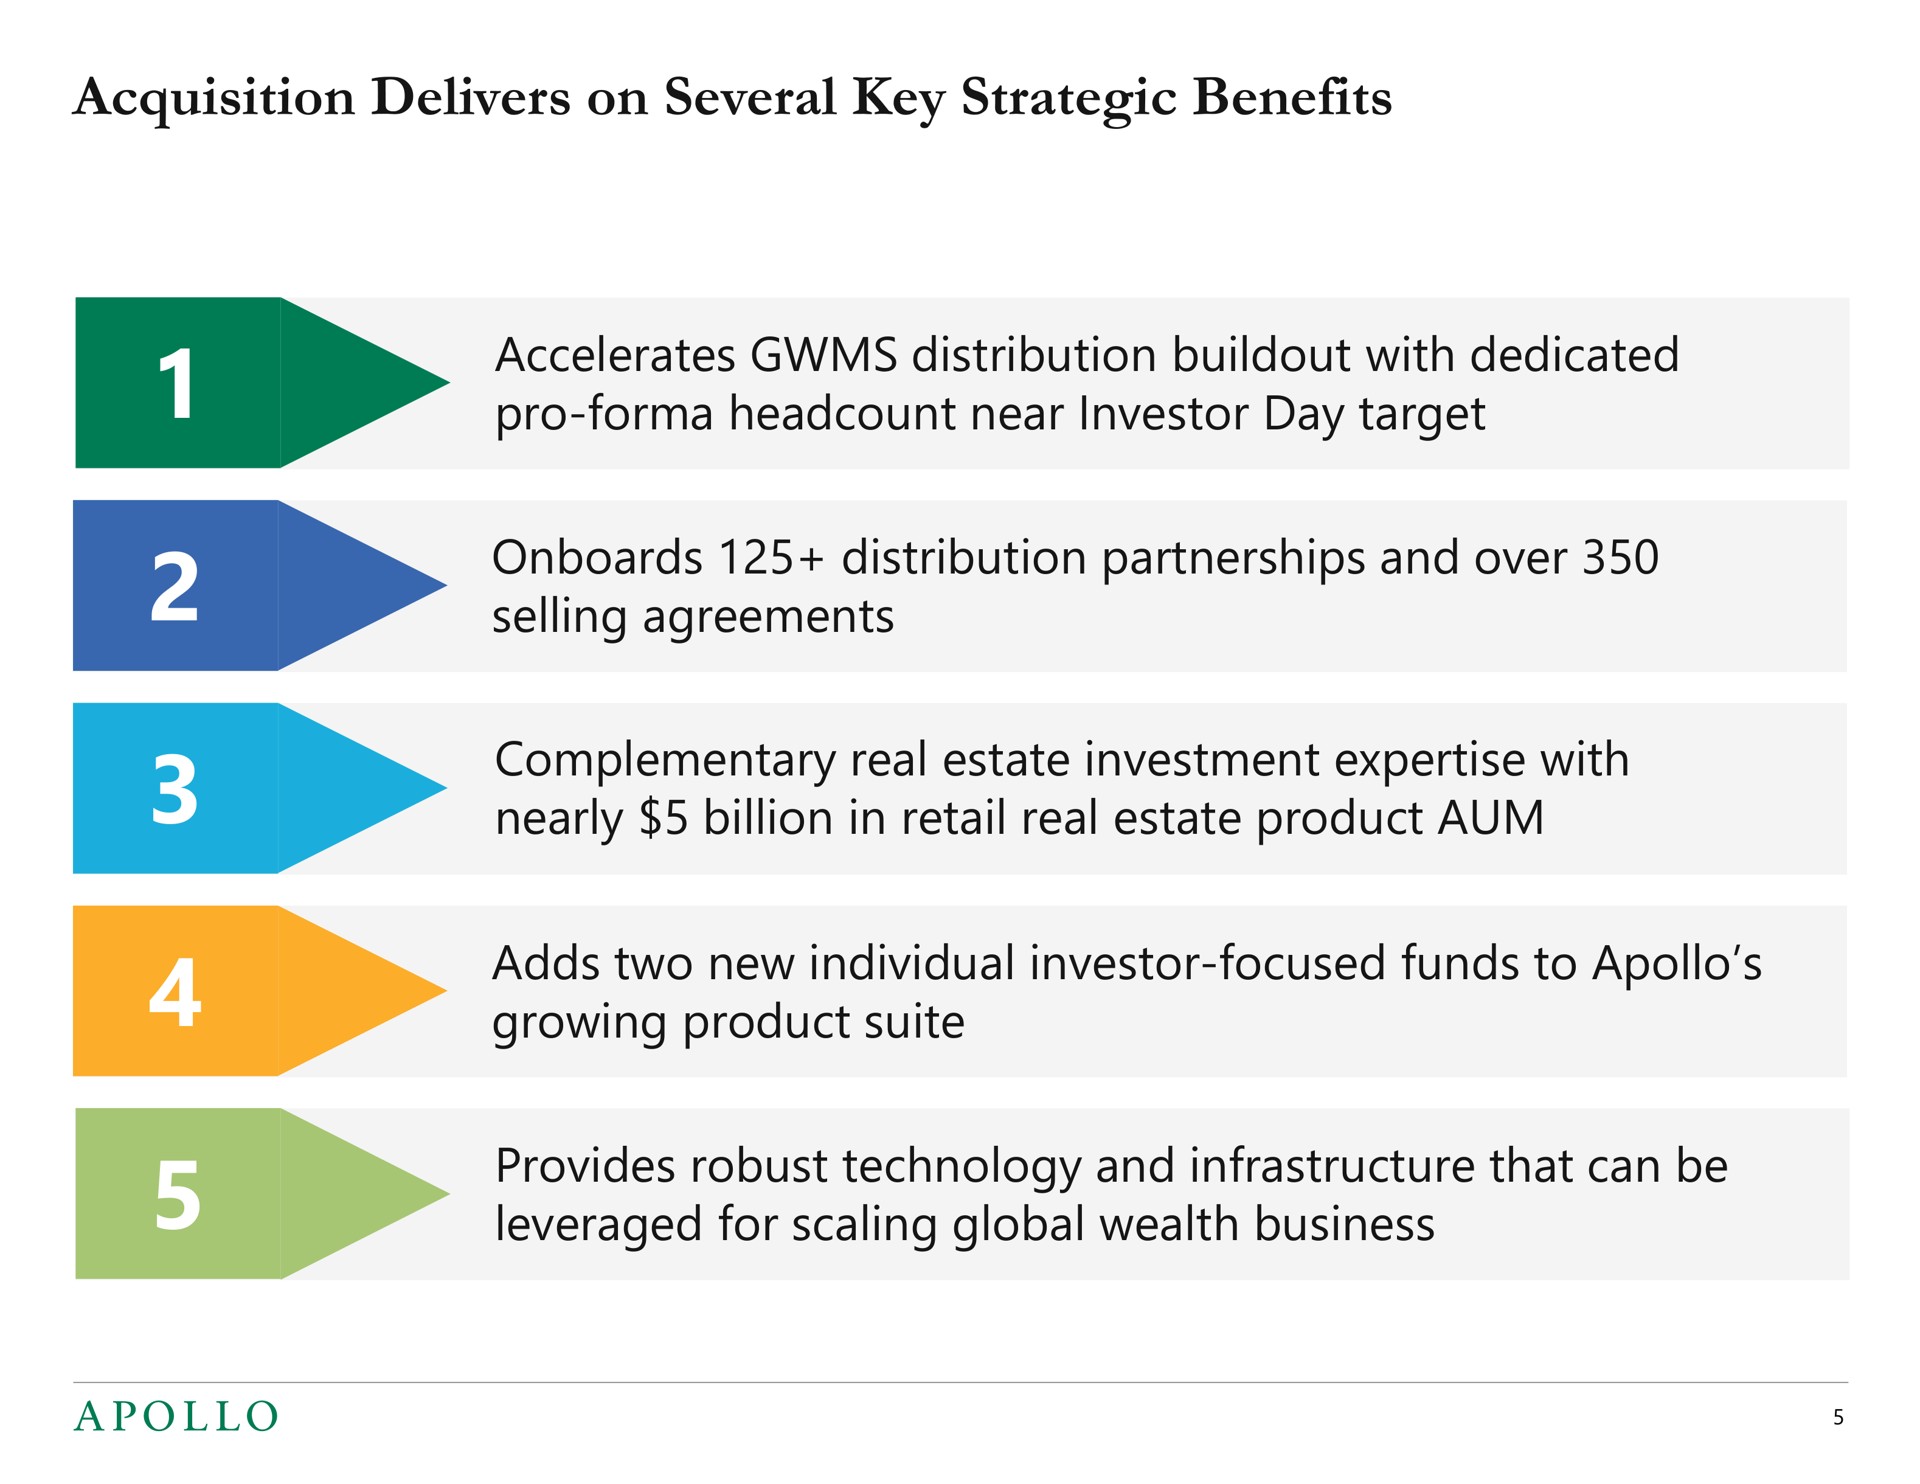 acquisition delivers on several key strategic benefits accelerates distribution with dedicated pro near investor day target distribution partnerships and over selling agreements complementary real estate investment with nearly billion in retail real estate product aum adds two new individual investor focused funds to growing product suite provides robust technology and infrastructure that can be leveraged for scaling global wealth business | Apollo Global Management